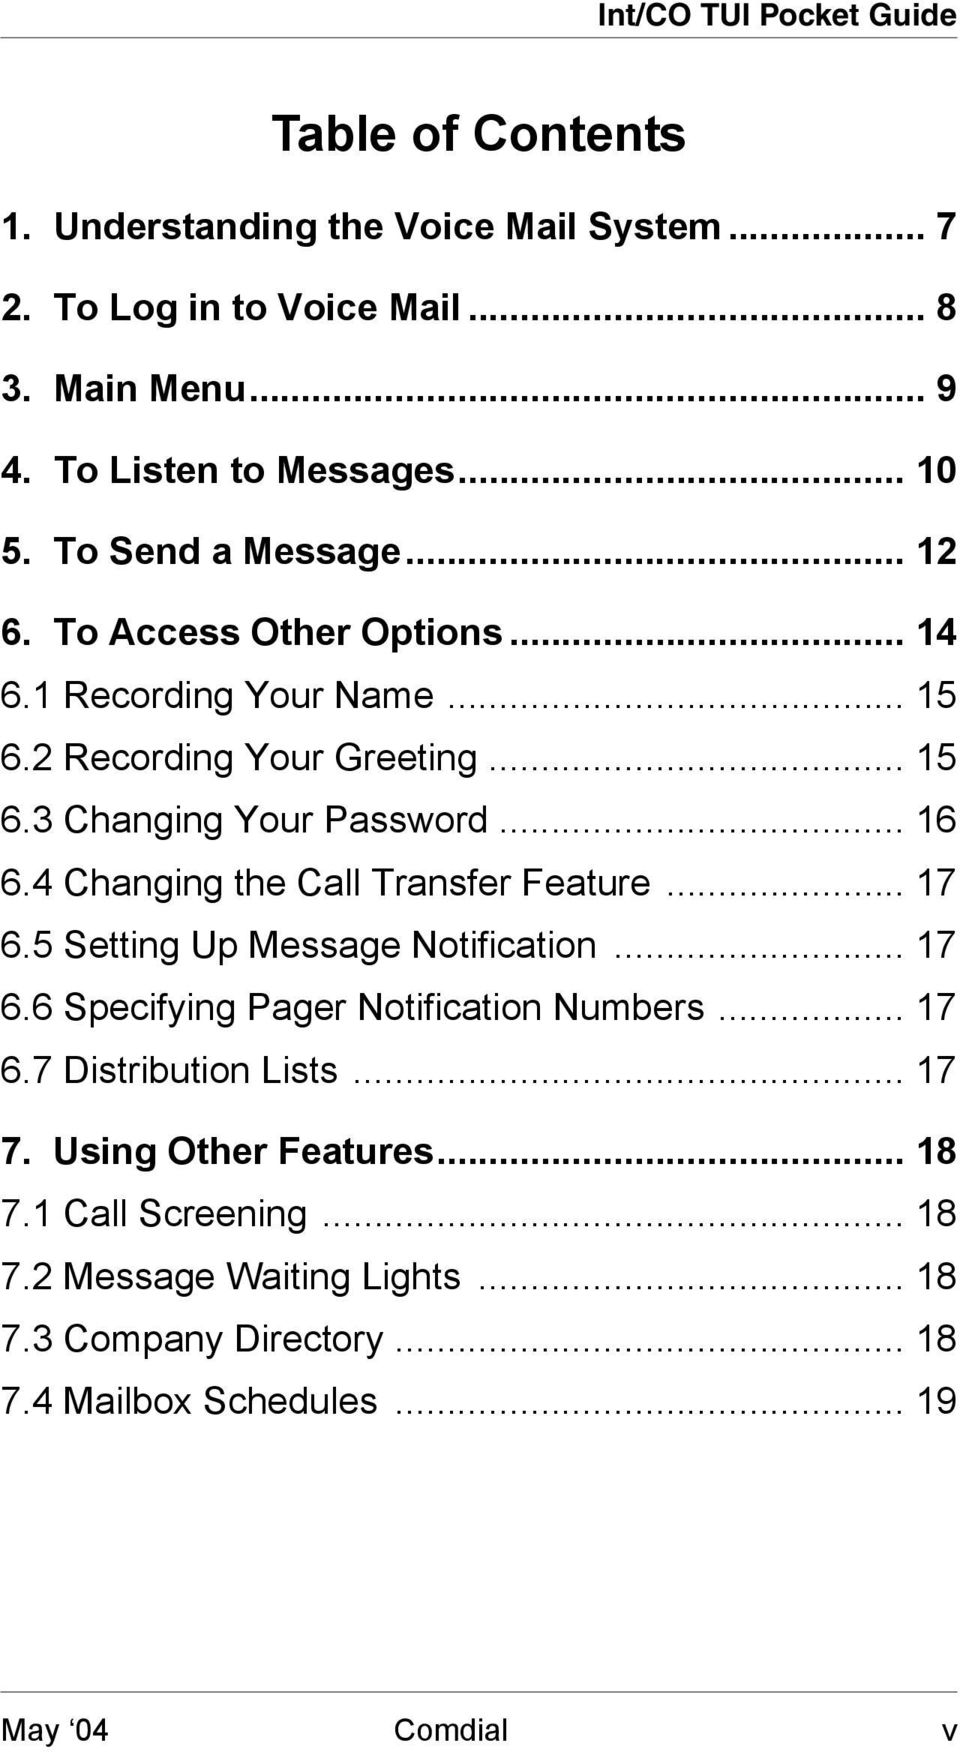 .. 16 6.4 Changing the Call Transfer Feature... 17 6.5 Setting Up Message Notification... 17 6.6 Specifying Pager Notification Numbers... 17 6.7 Distribution Lists.